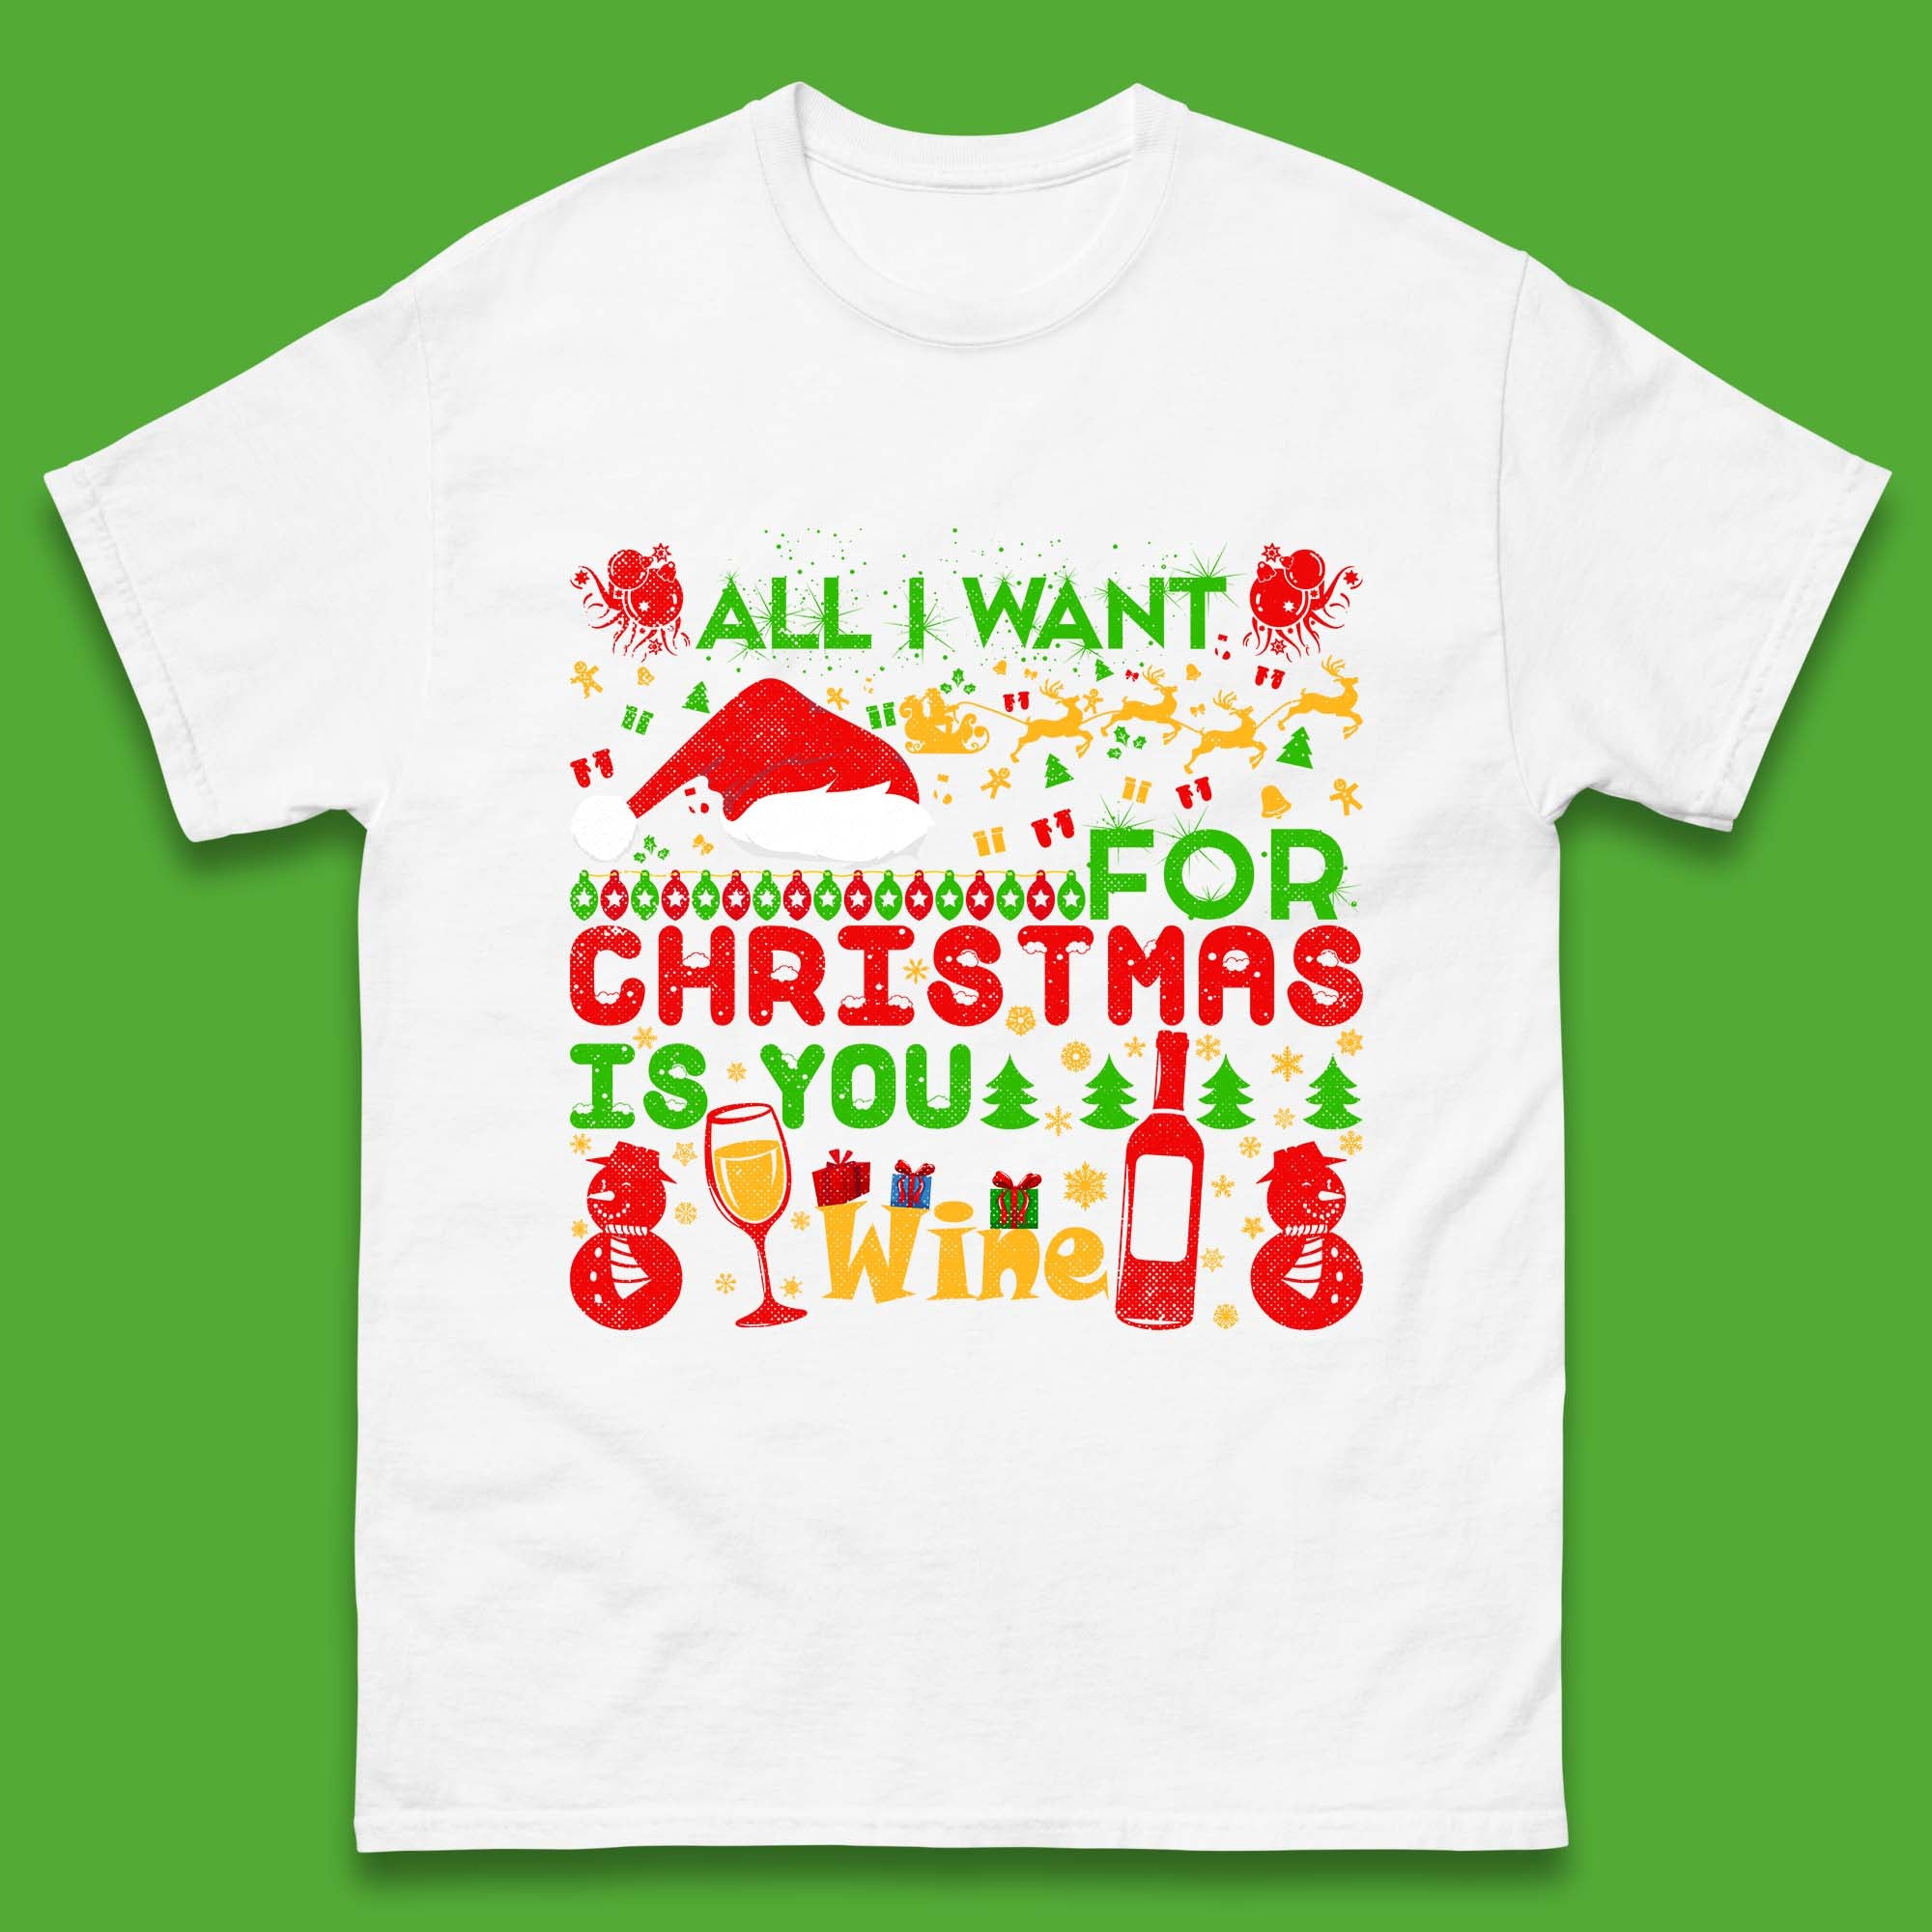 All I Want for Christmas is You T Shirt